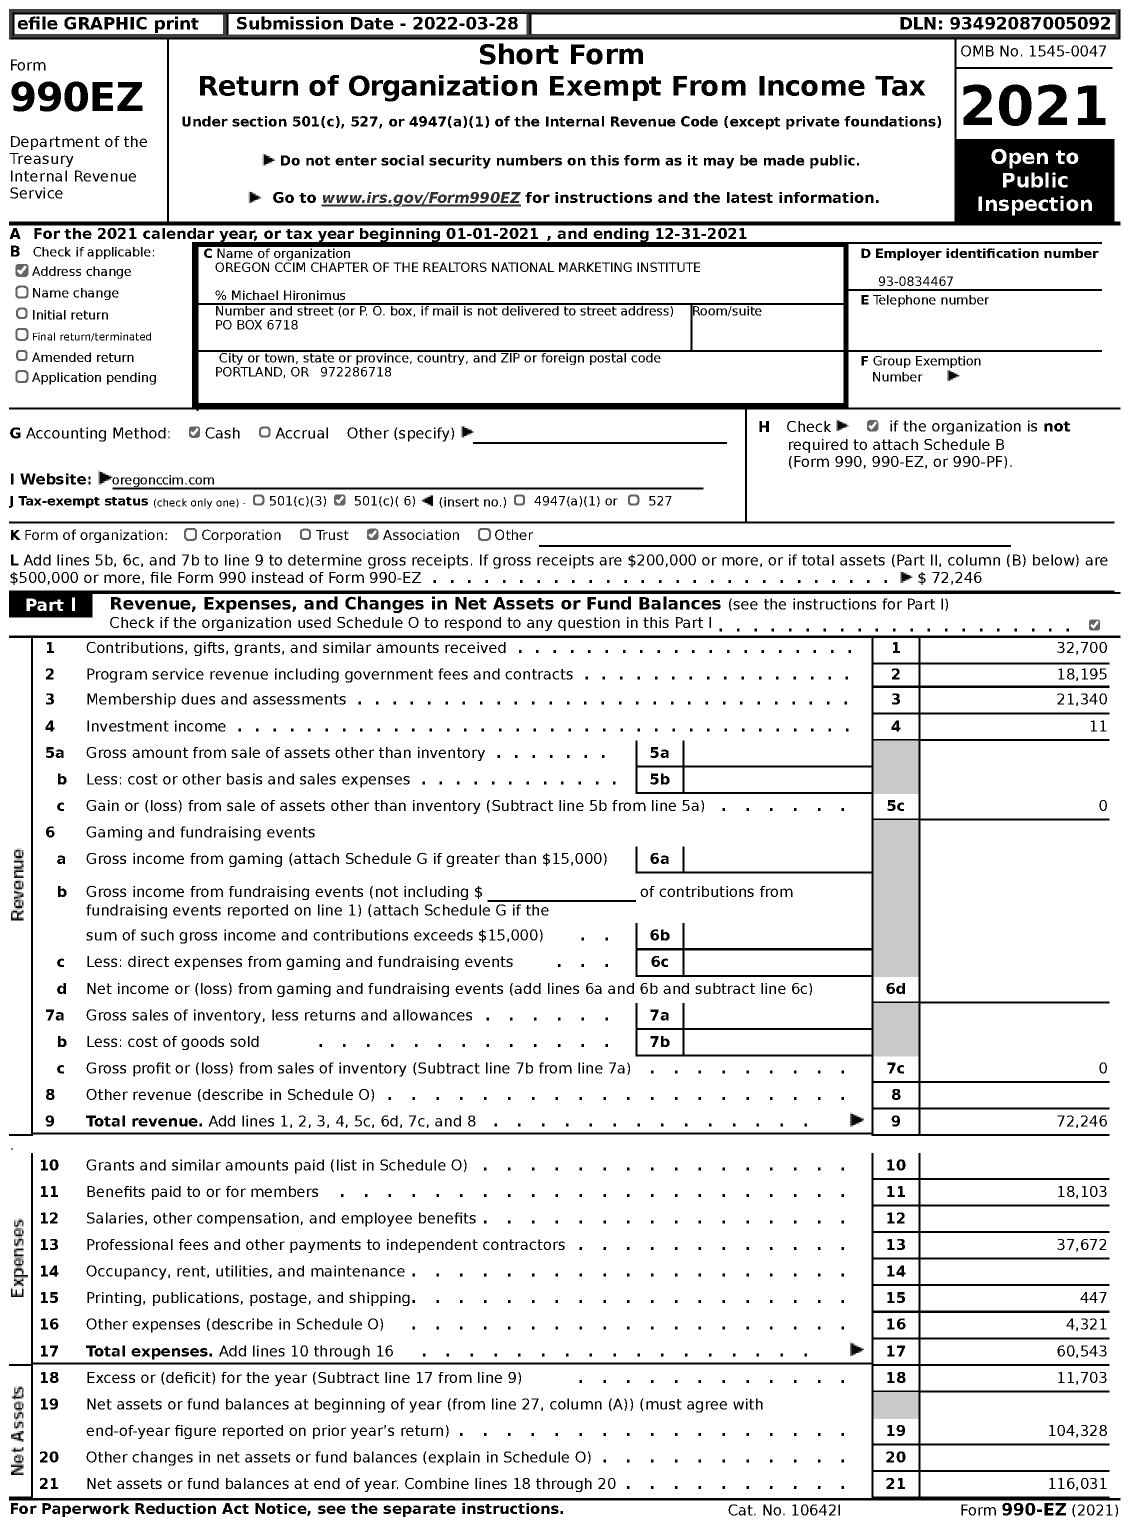 Image of first page of 2021 Form 990EZ for Oregon Ccim Chapter of the Realtors National Marketing Institute